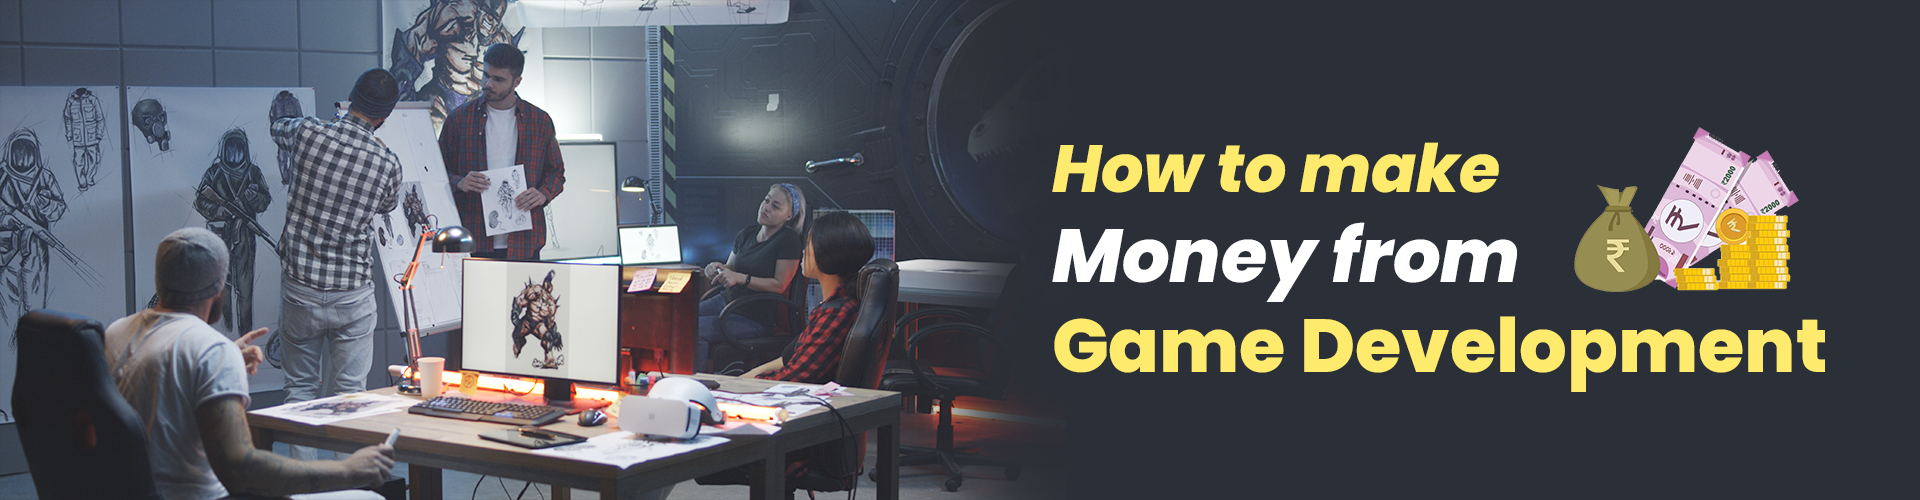 How to make money from game development